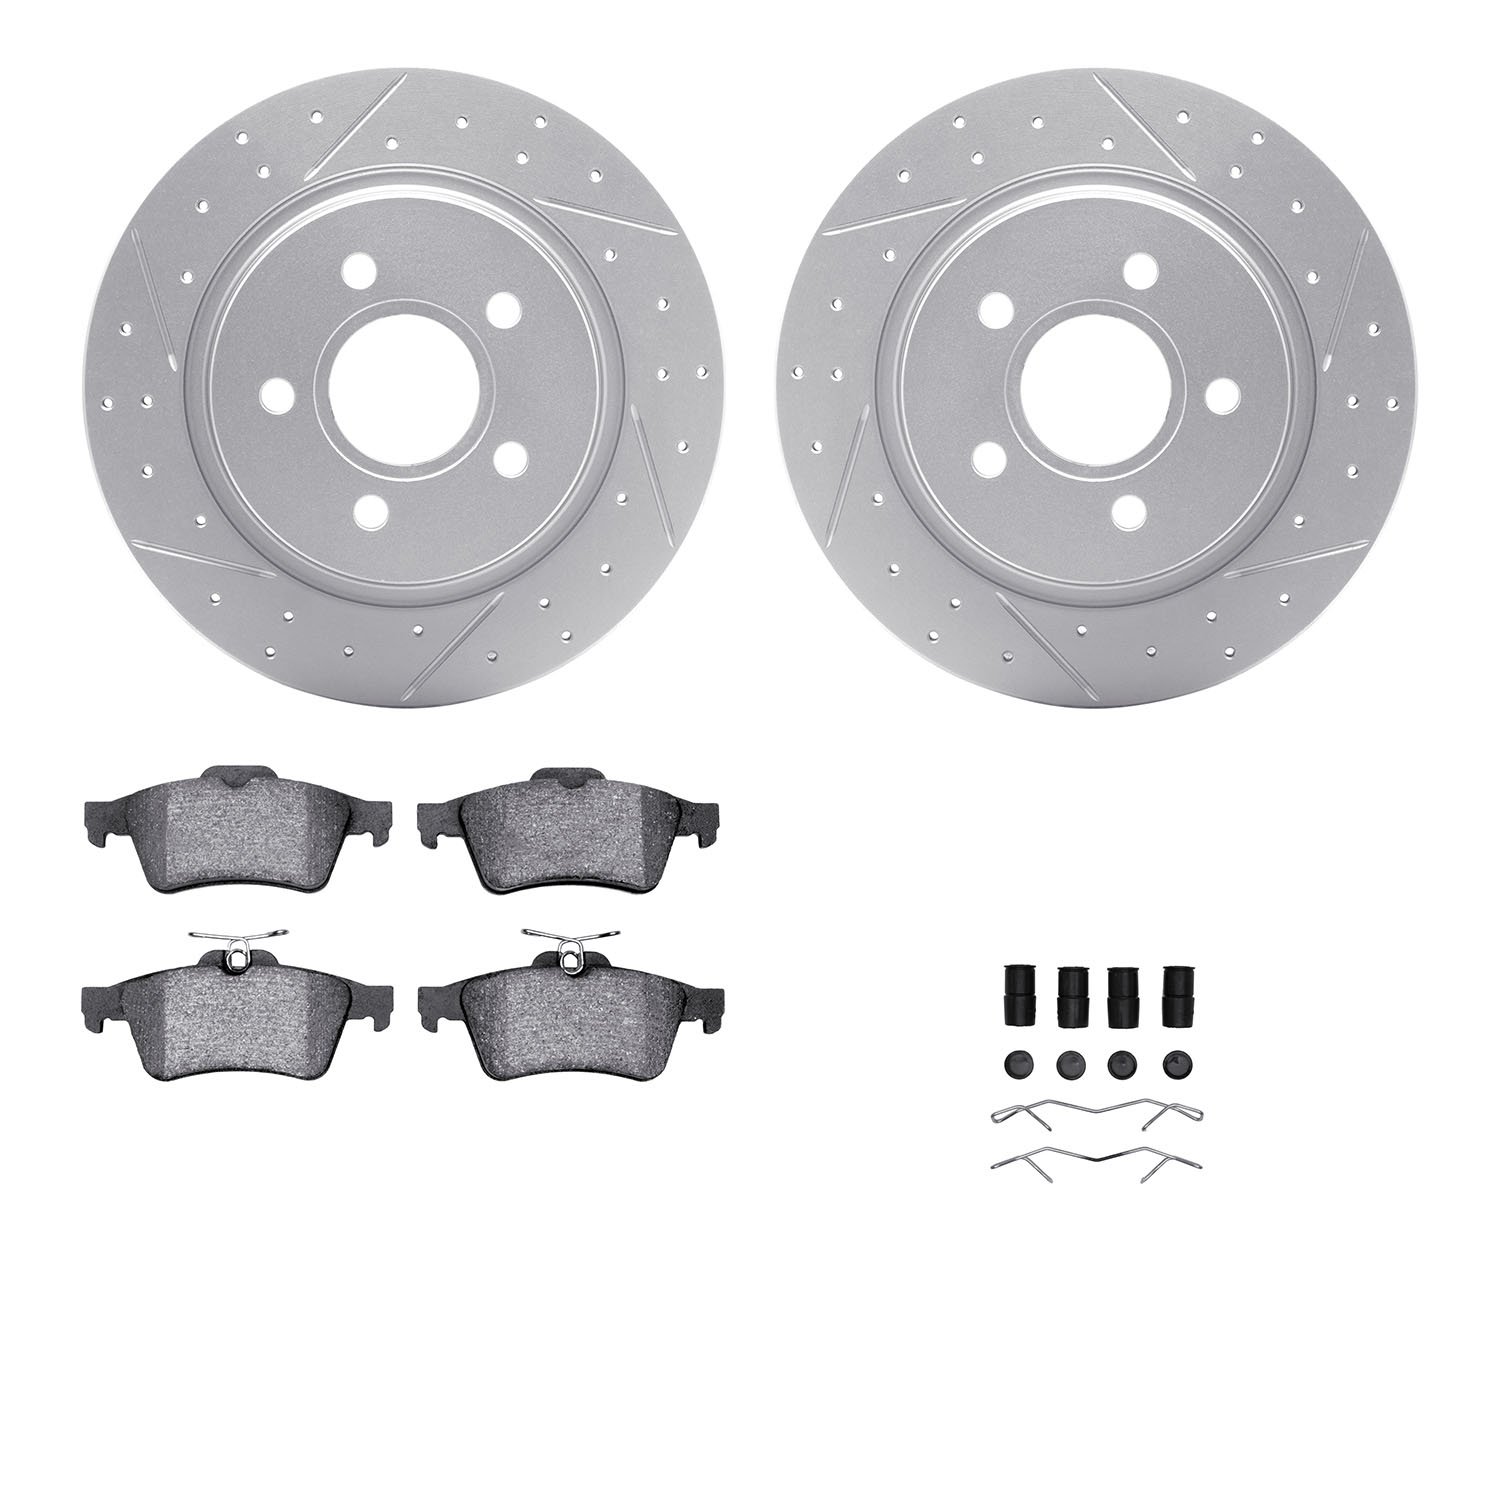 2512-27018 Geoperformance Drilled/Slotted Rotors w/5000 Advanced Brake Pads Kit & Hardware, 2004-2013 Volvo, Position: Rear